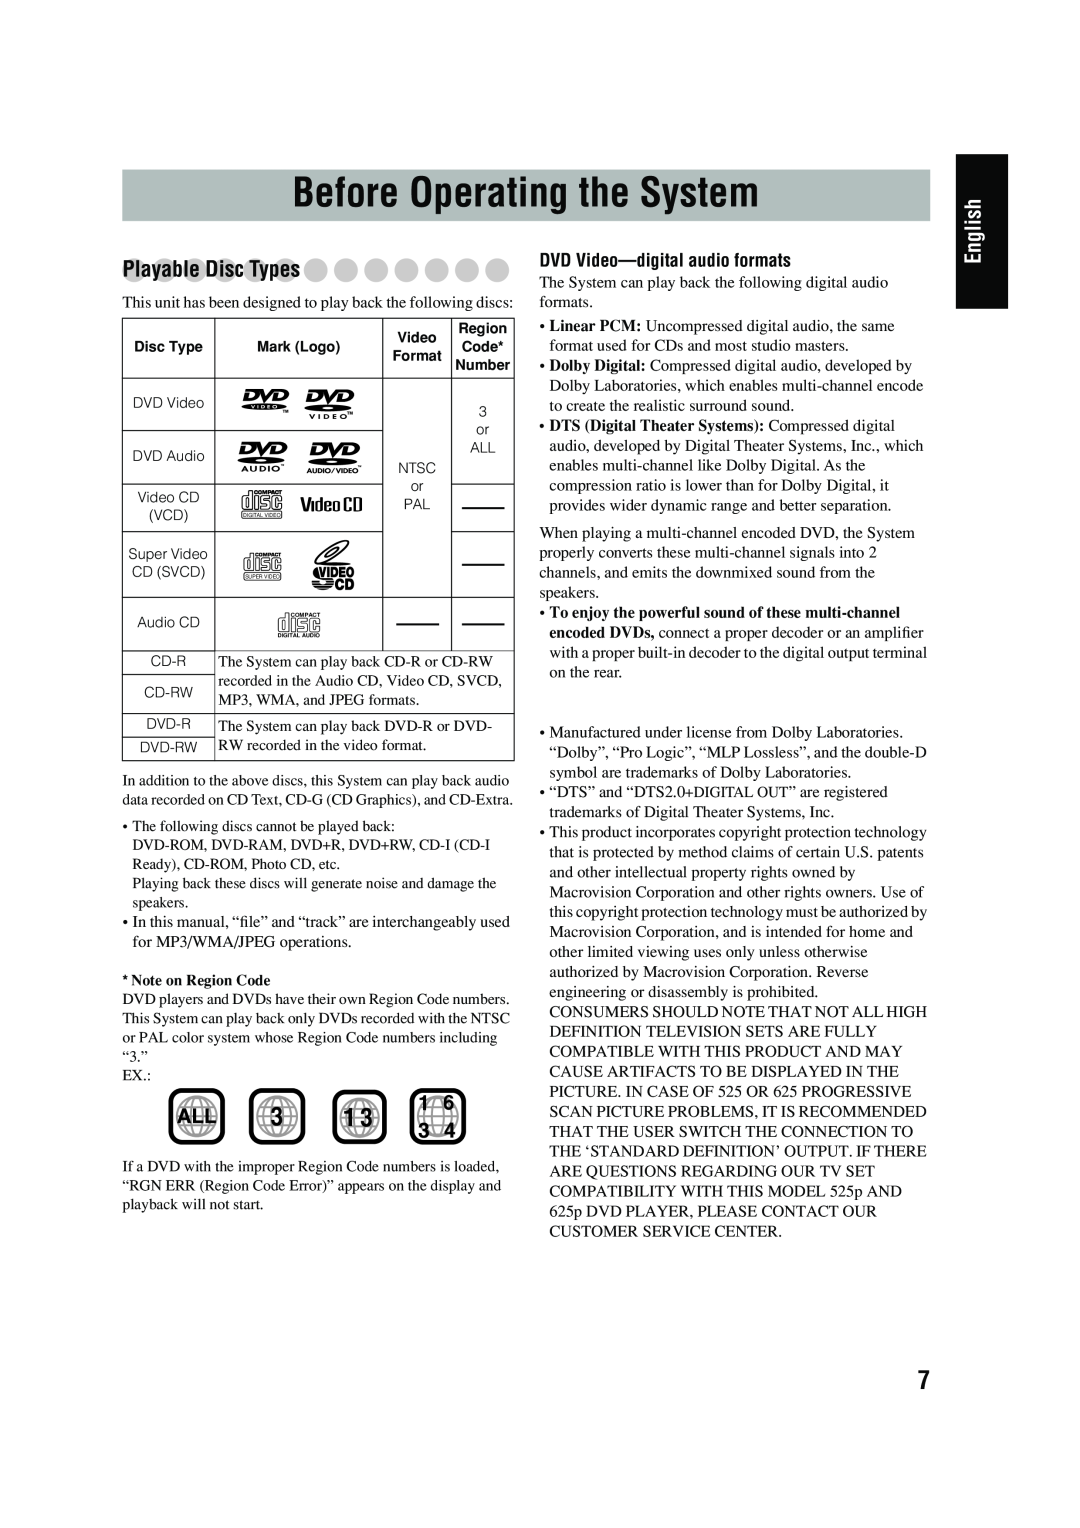 JVC UX-P450 manual Before Operating the System, English, Playable Disc Types, DVD Video—digitalaudio formats 